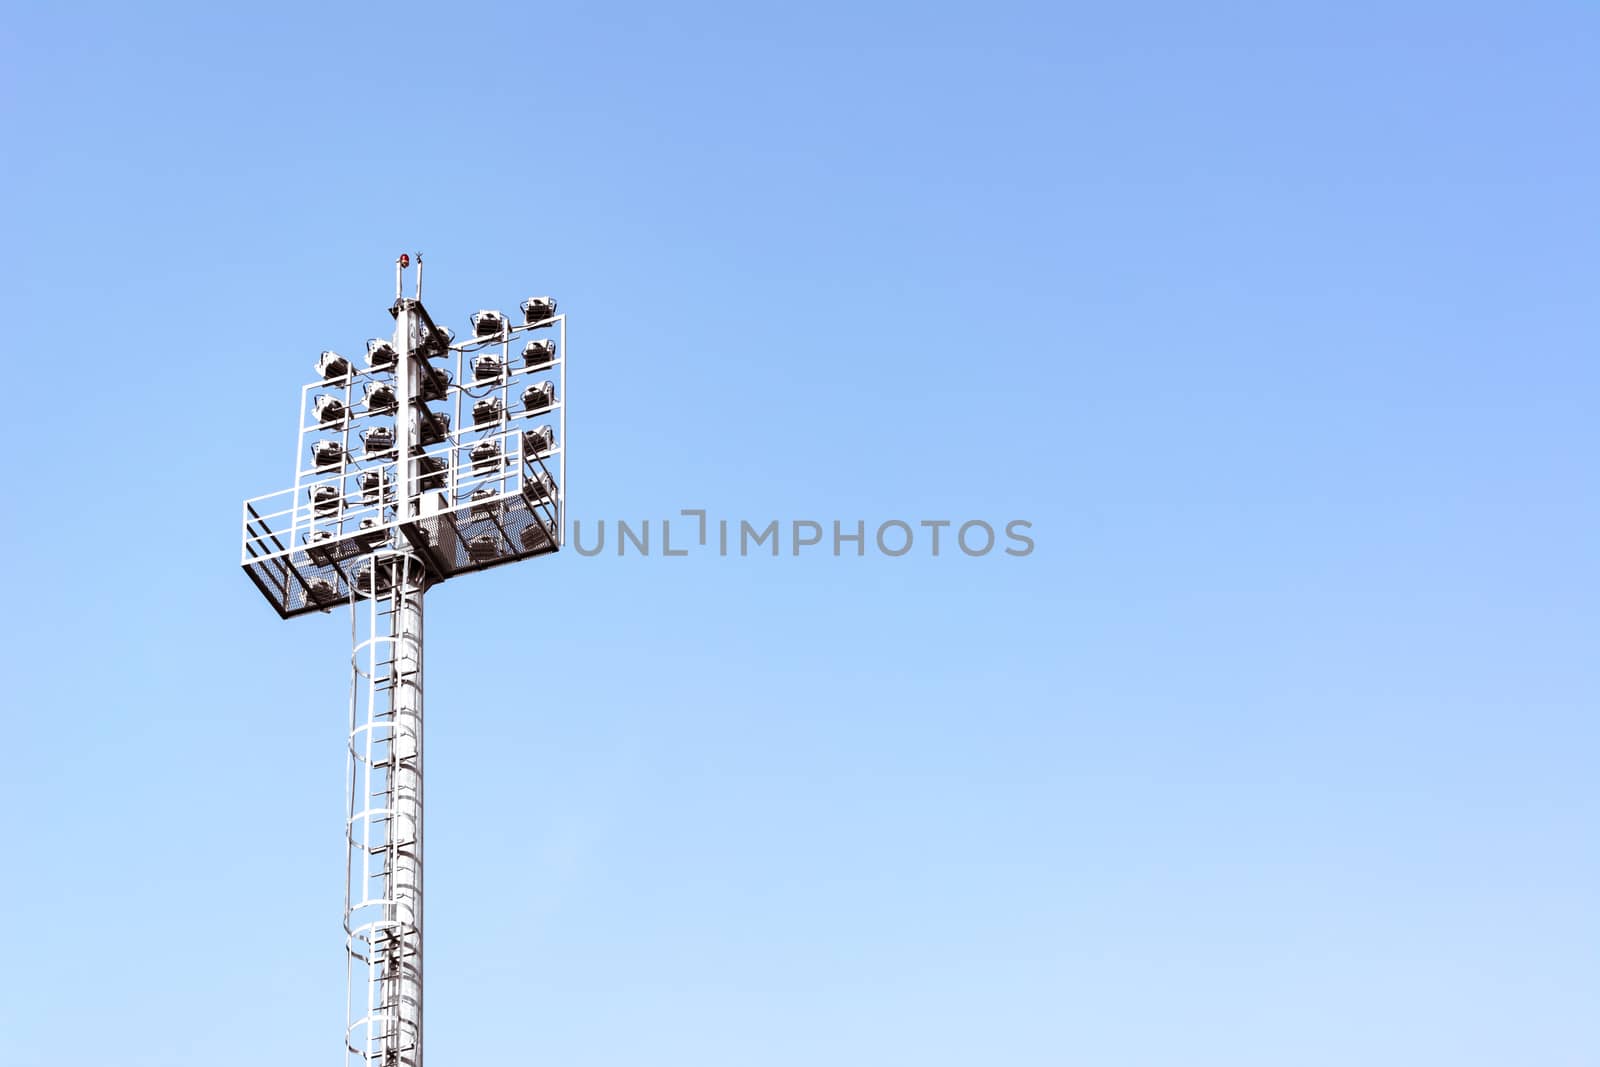 Stadium lights with sky for background